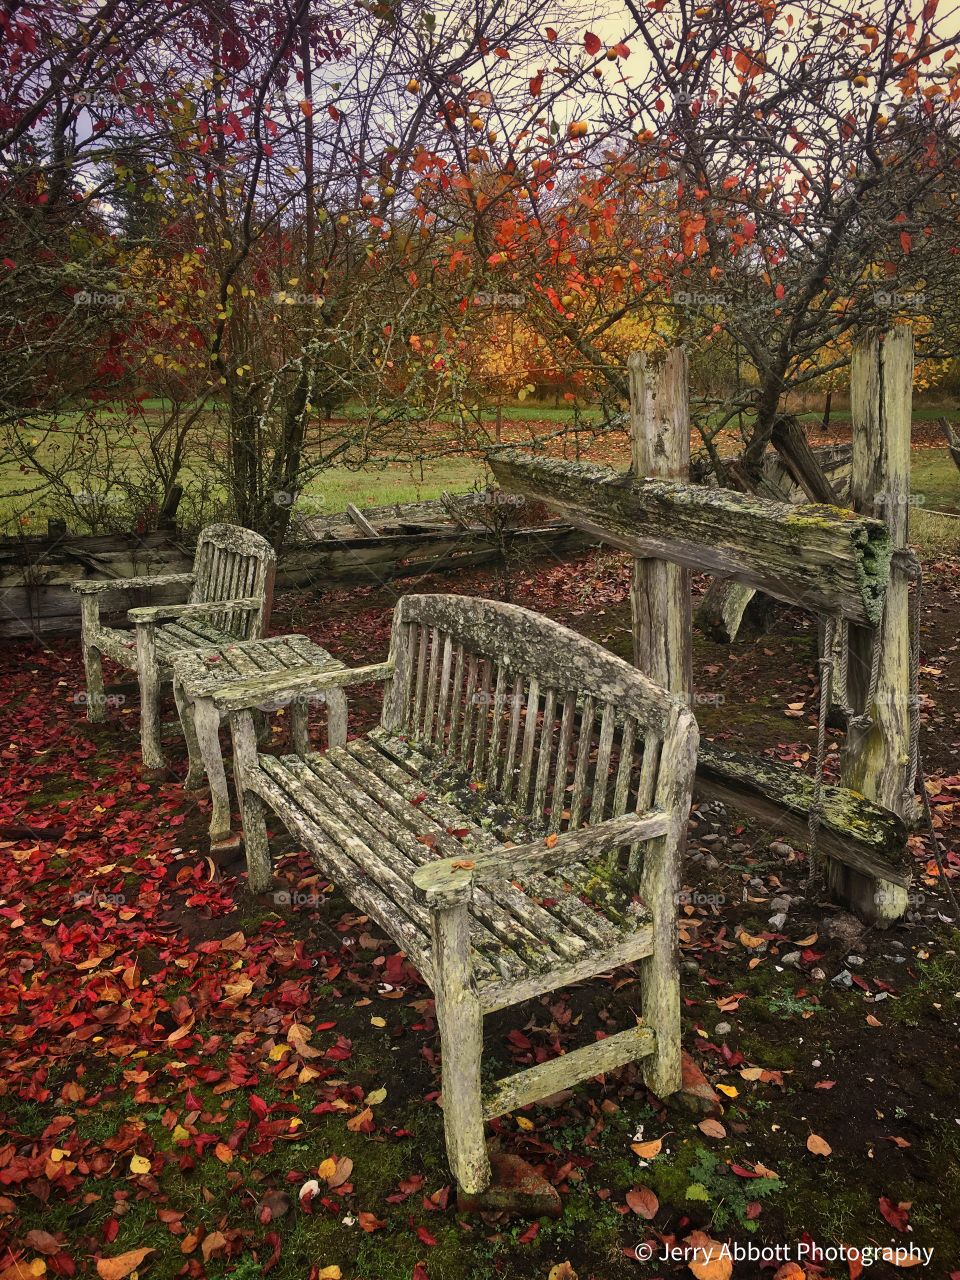  Vintage chairs in a peaceful setting